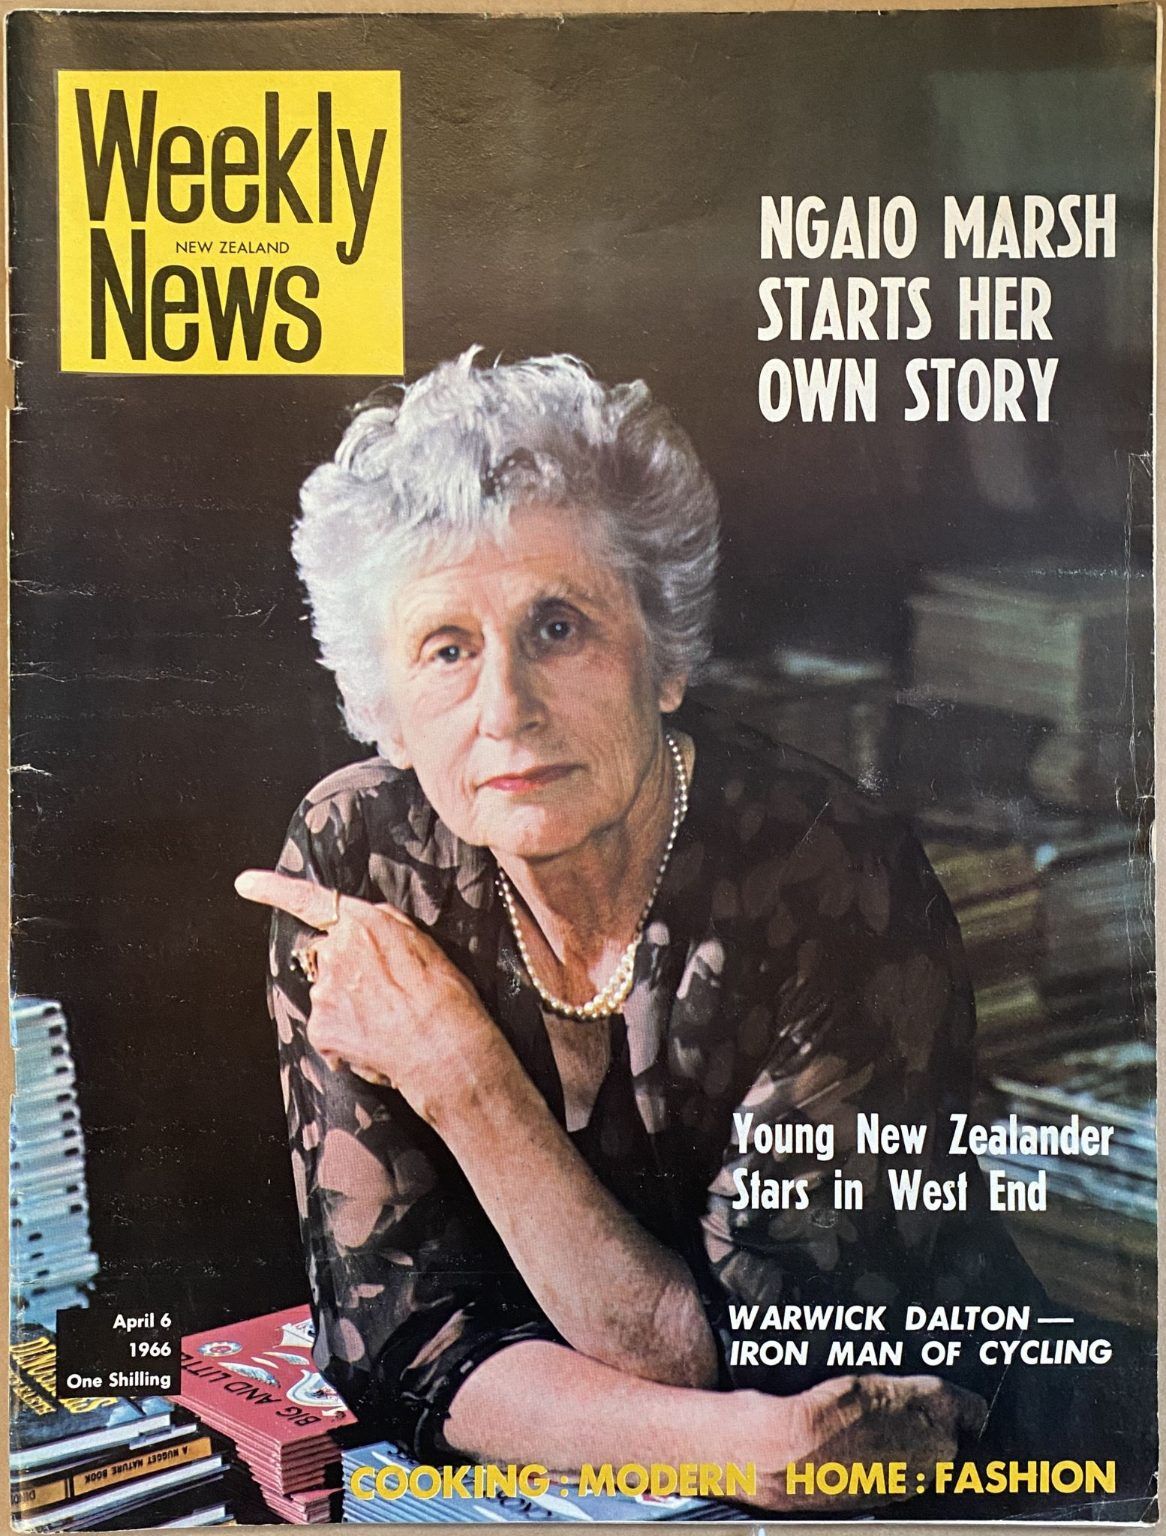 OLD NEWSPAPER: New Zealand Weekly News, No. 5341, 6 April 1966